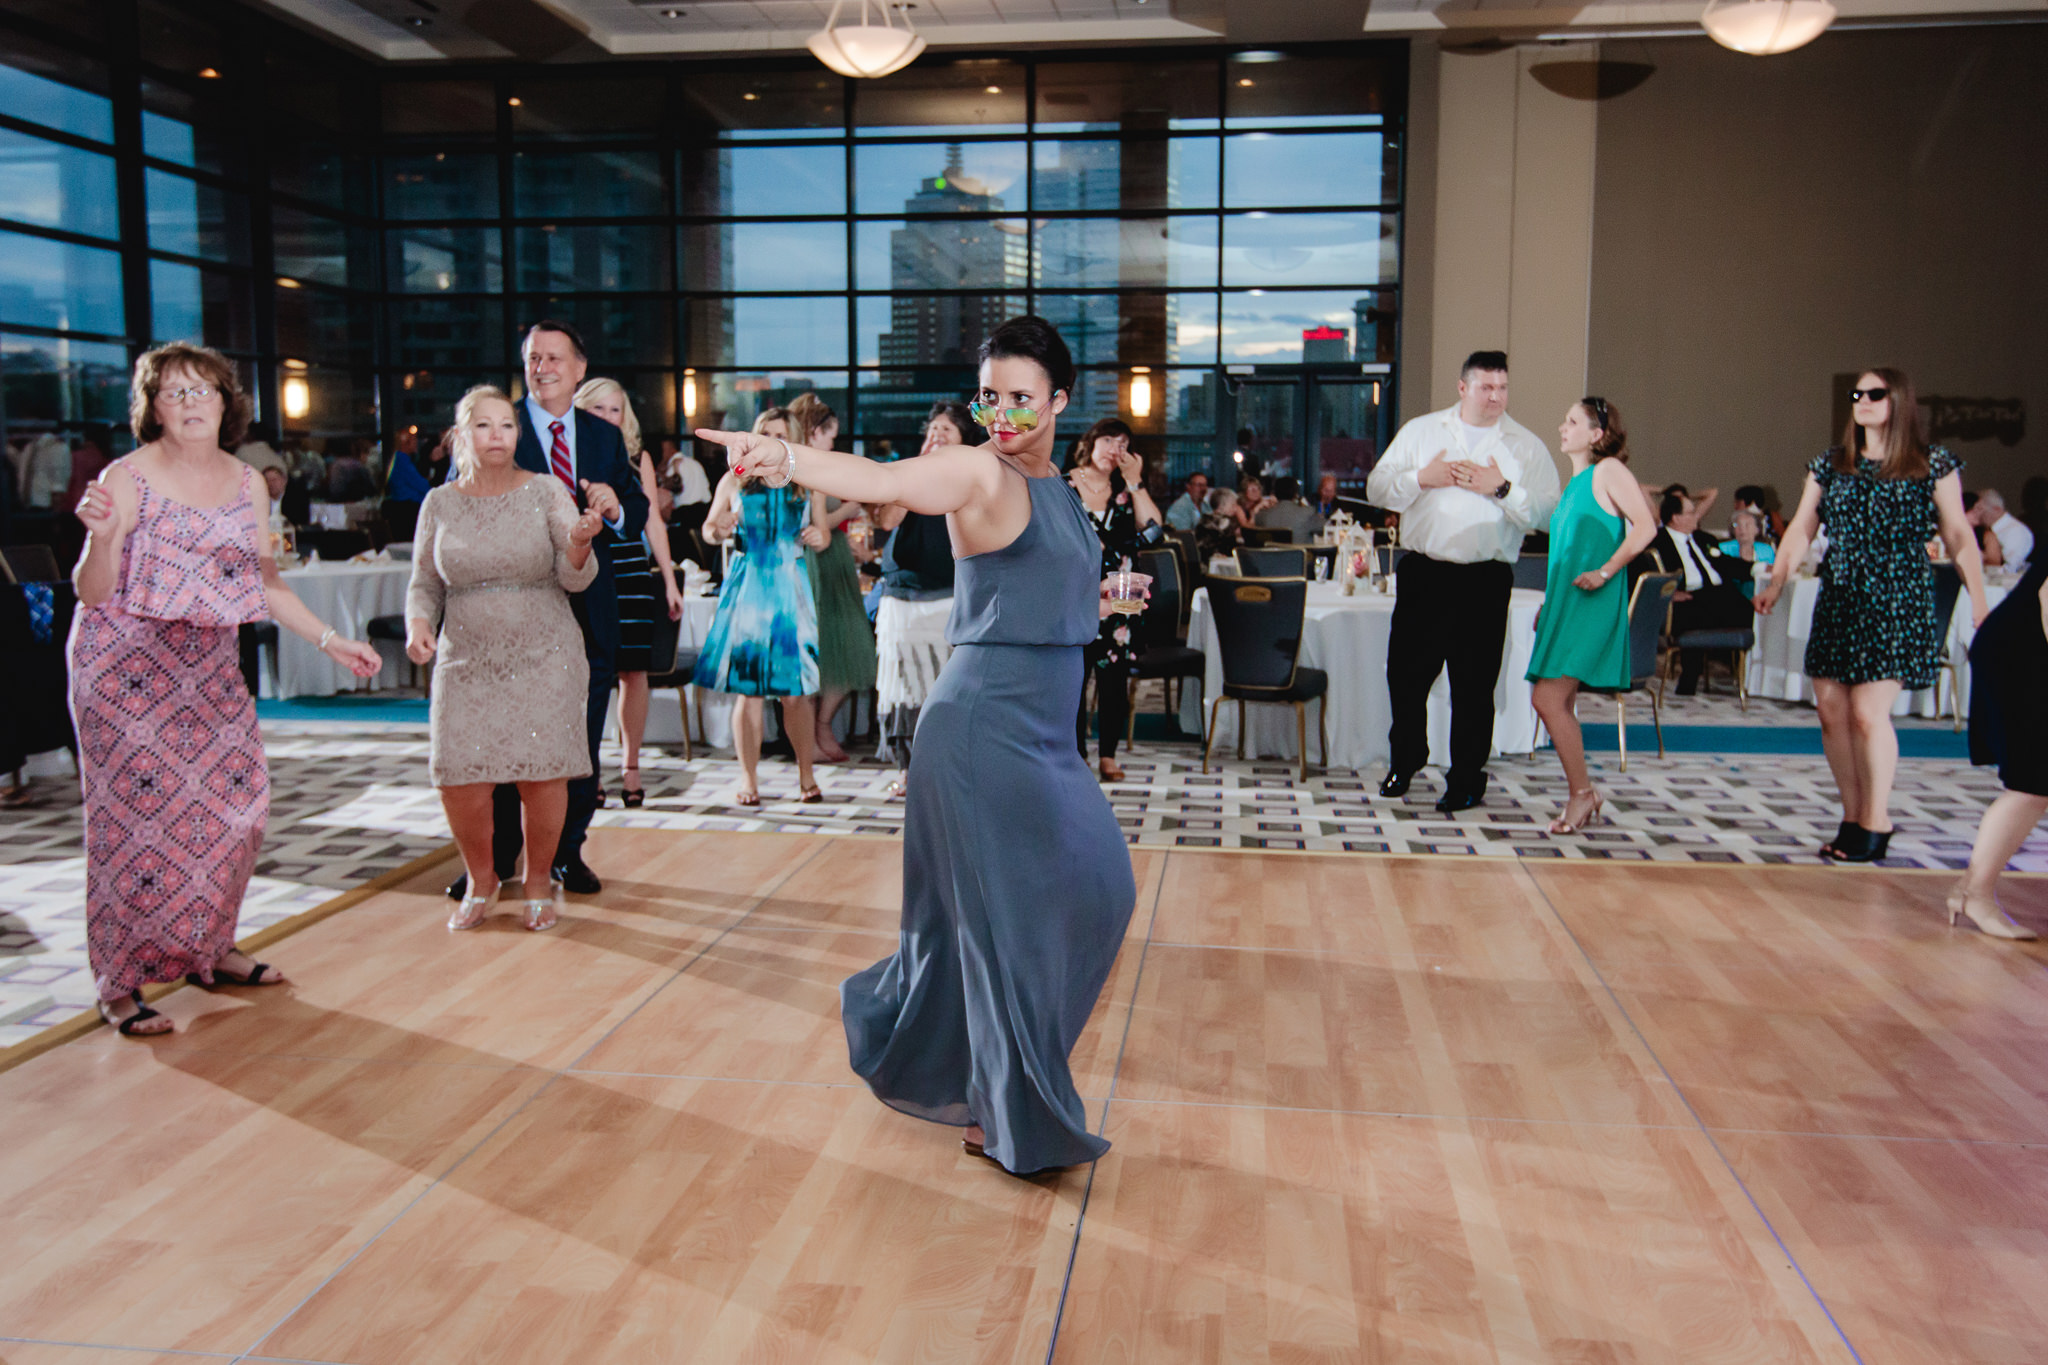 Sister of the groom dances at Duquesne University